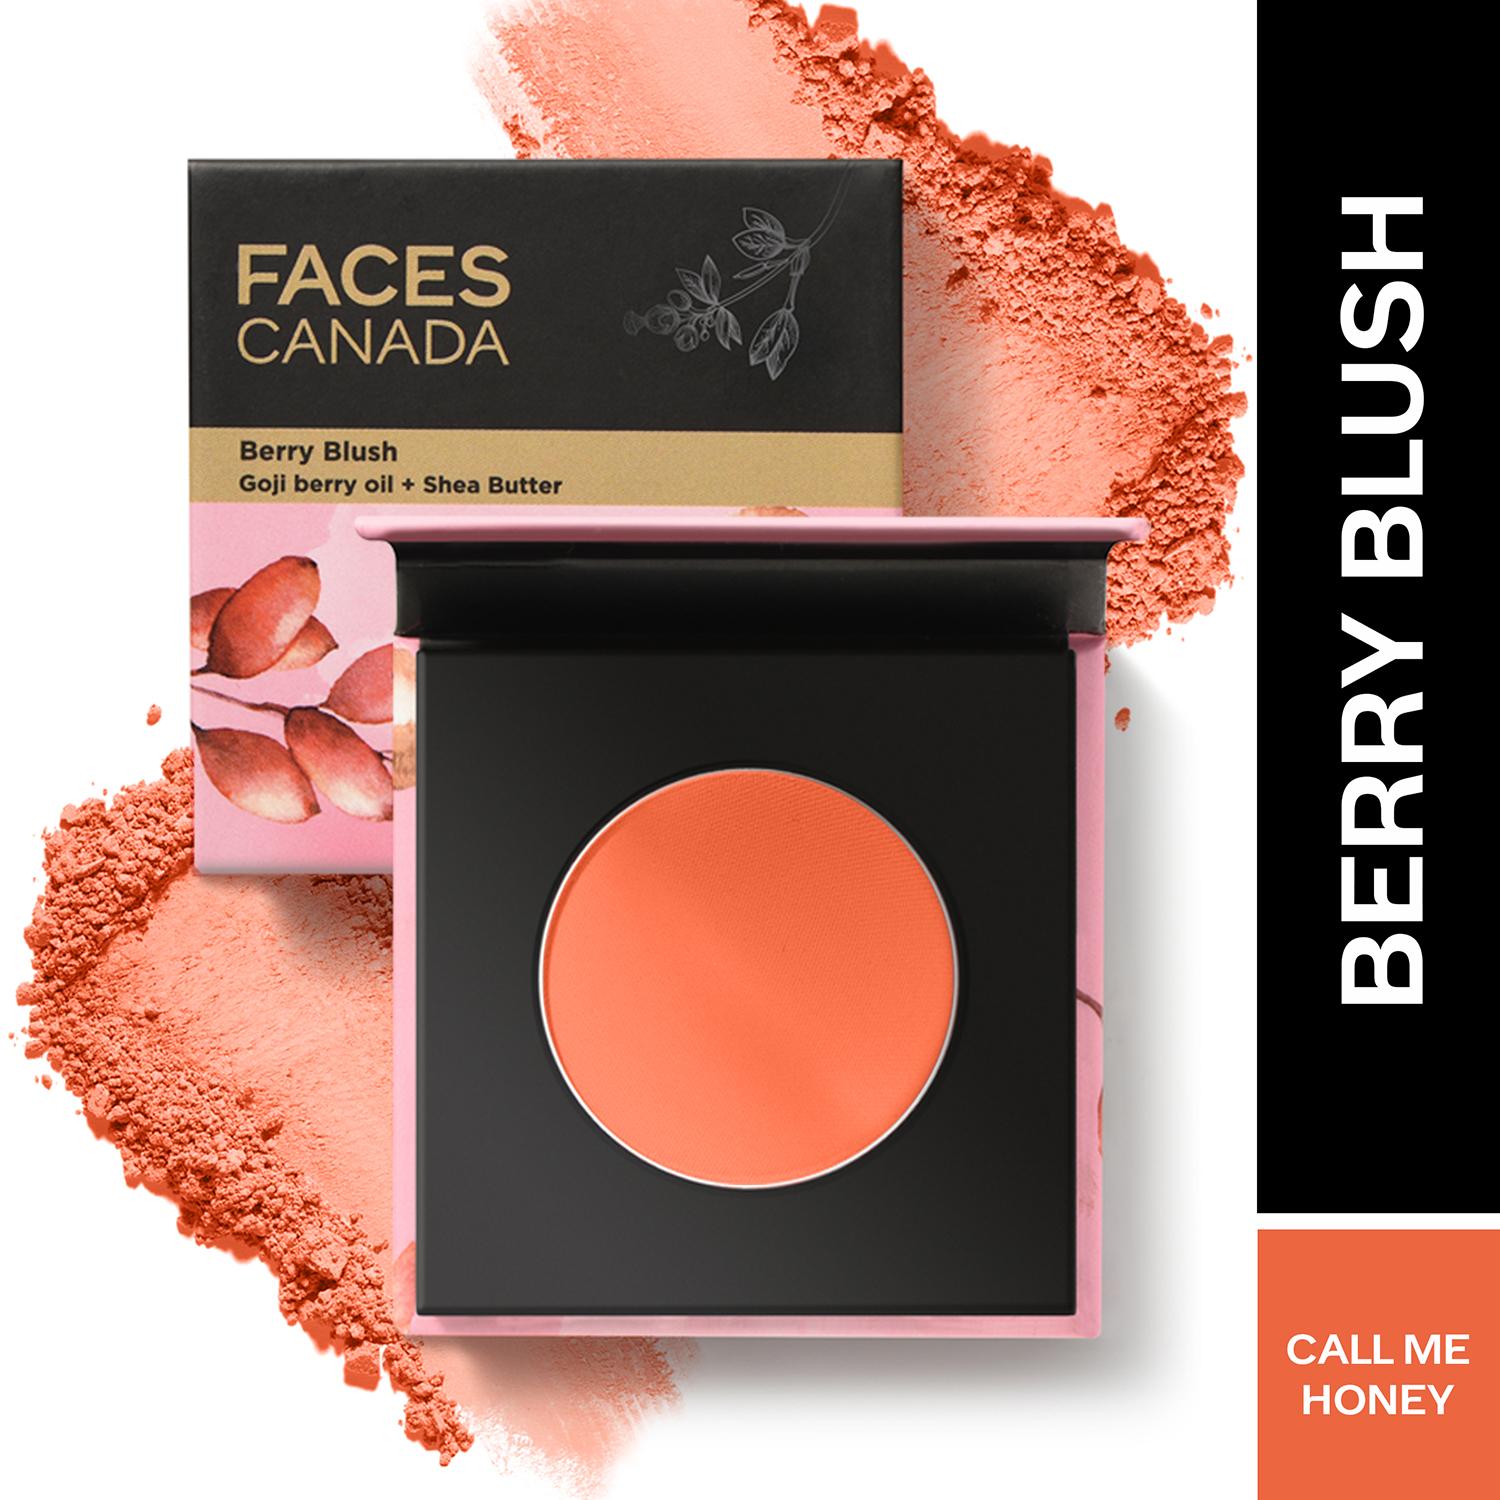 Faces Canada | Faces Canada Berry Blush - Call Me Honey 02, Lightweight Long Lasting Ultra-Matte HD Finish (4 g)